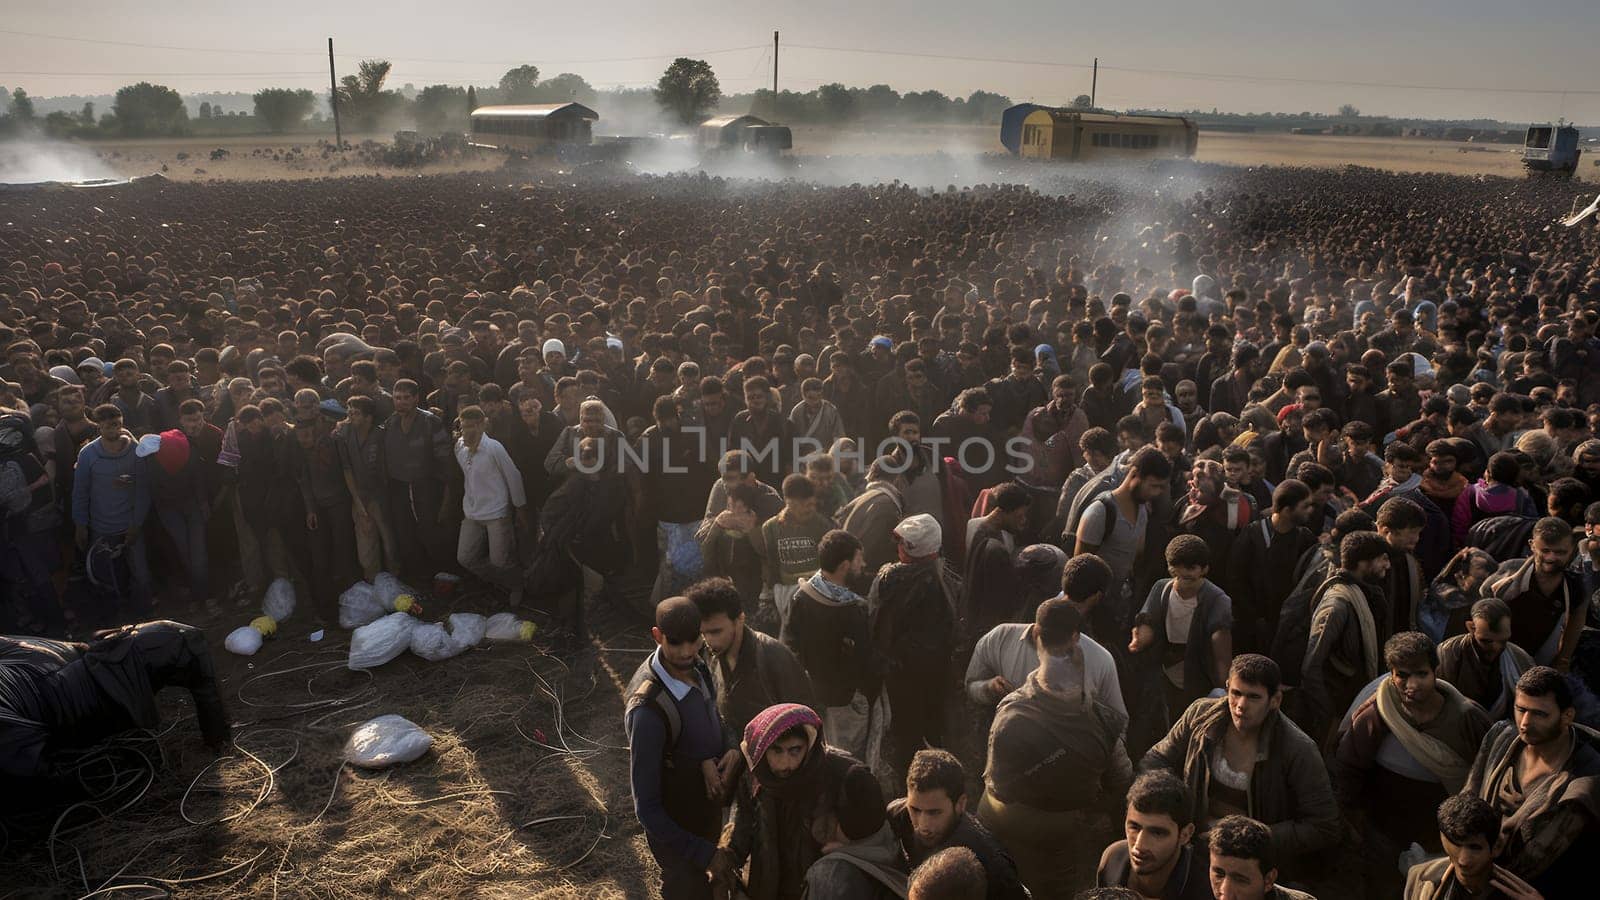 large crowd of middle eastern refugees in a refugee camp. Neural network generated in May 2023. Not based on any actual person, scene or pattern.